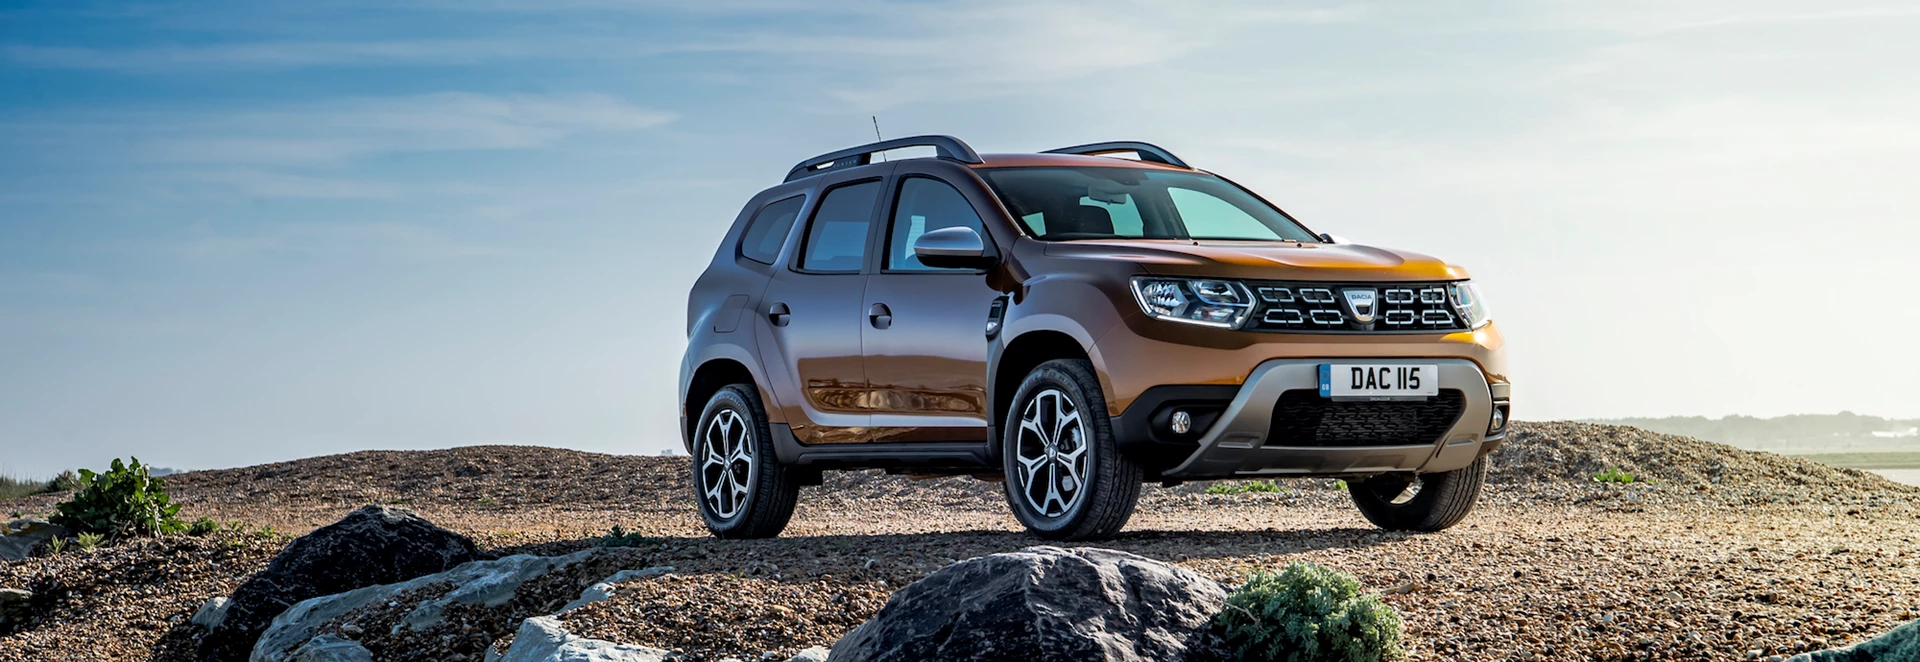 Dacia launches new TCe petrol engines for Duster